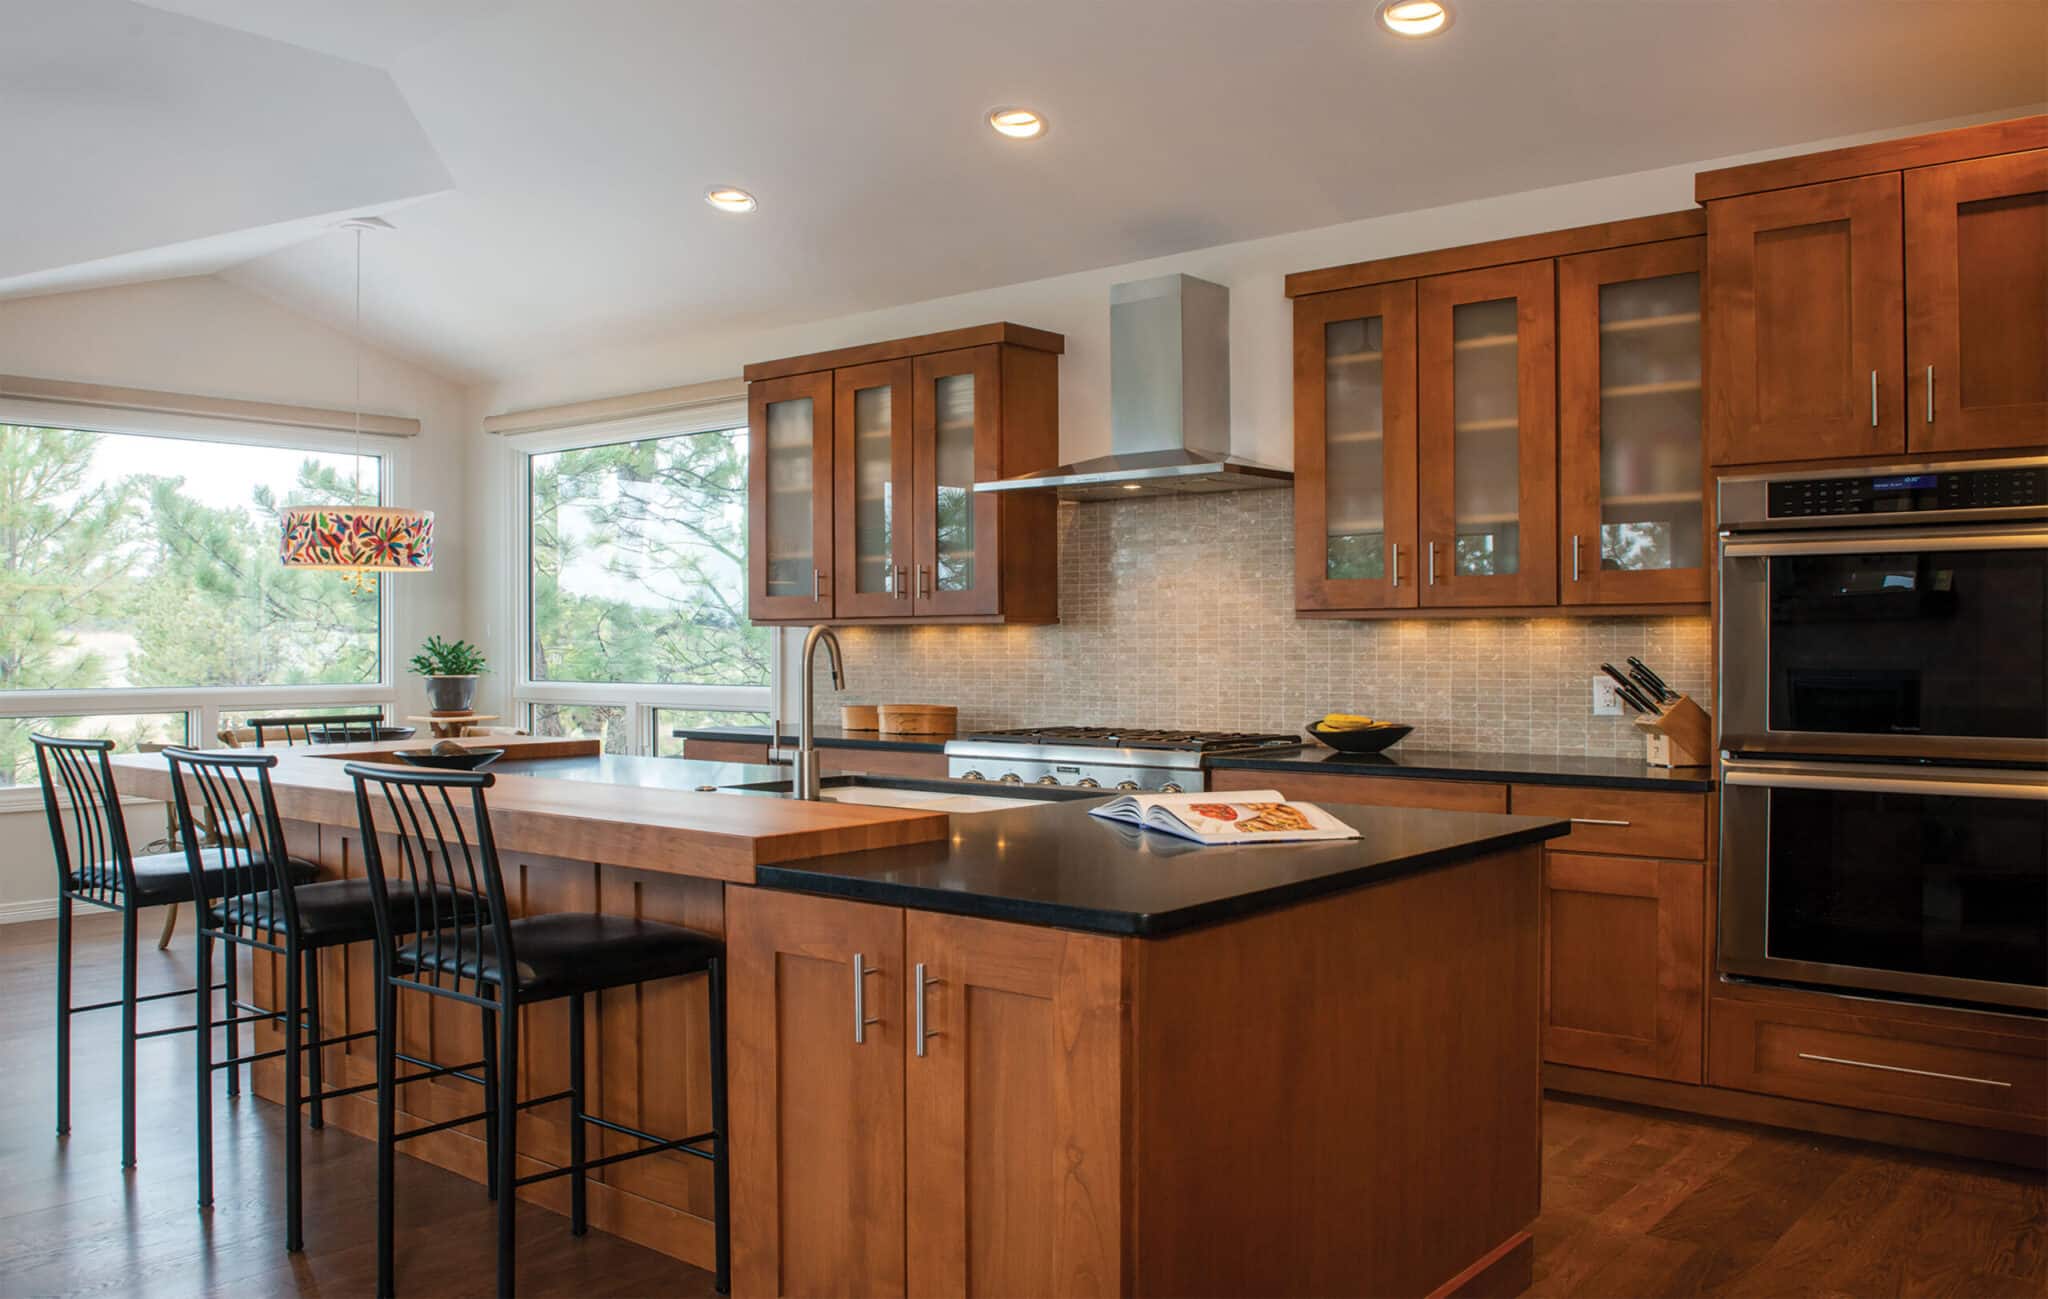 Woodharbor brown kitchen cabinets with black countertops